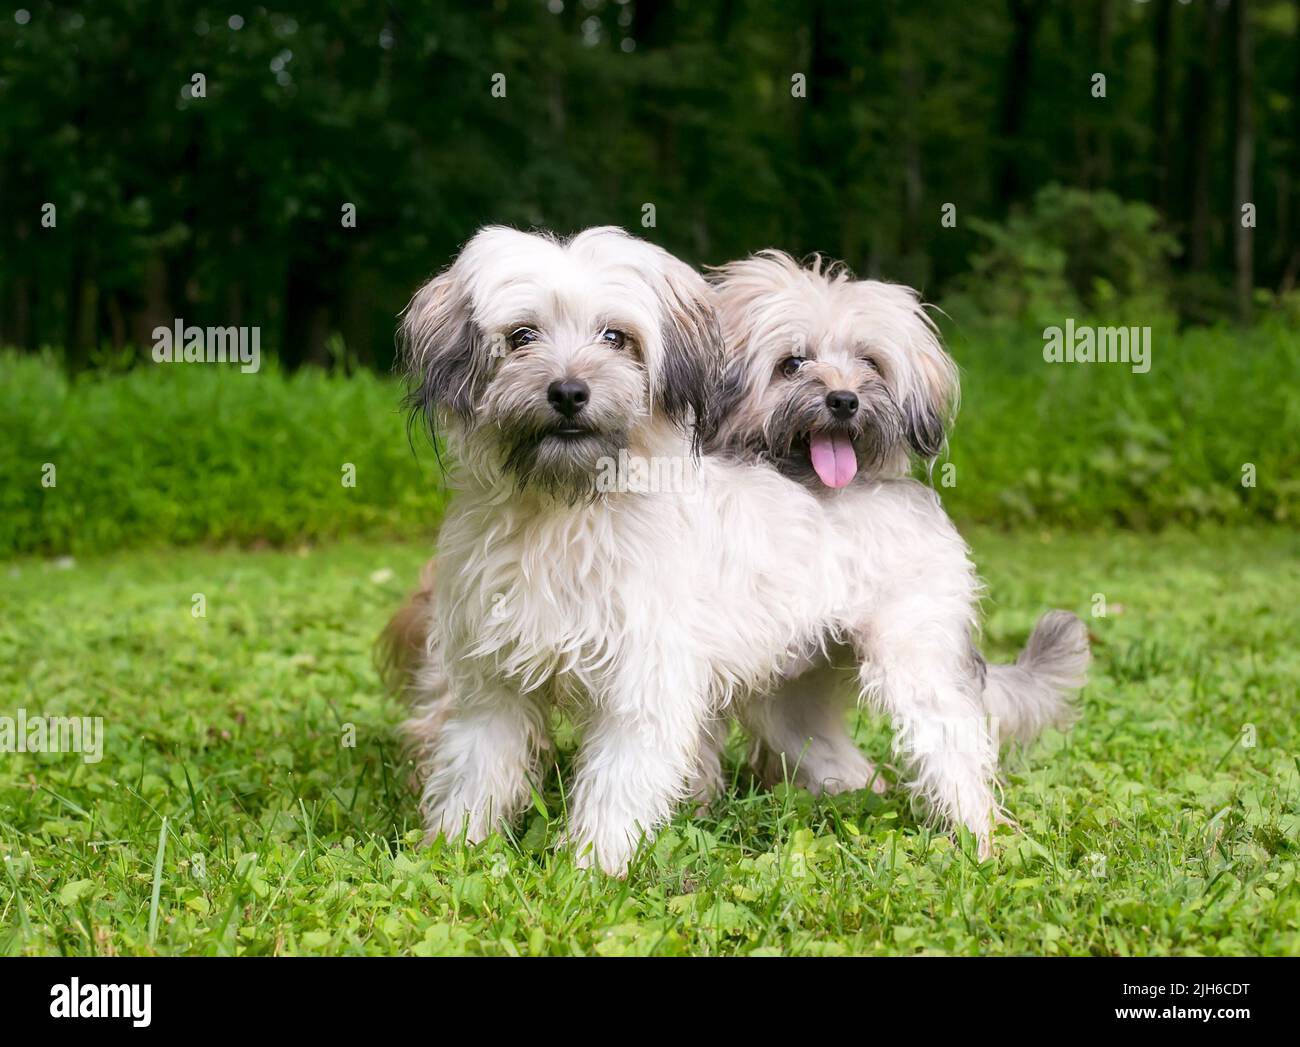 A pair of scruffy Terrier mixed breed dogs standing together outdoors Stock Photo